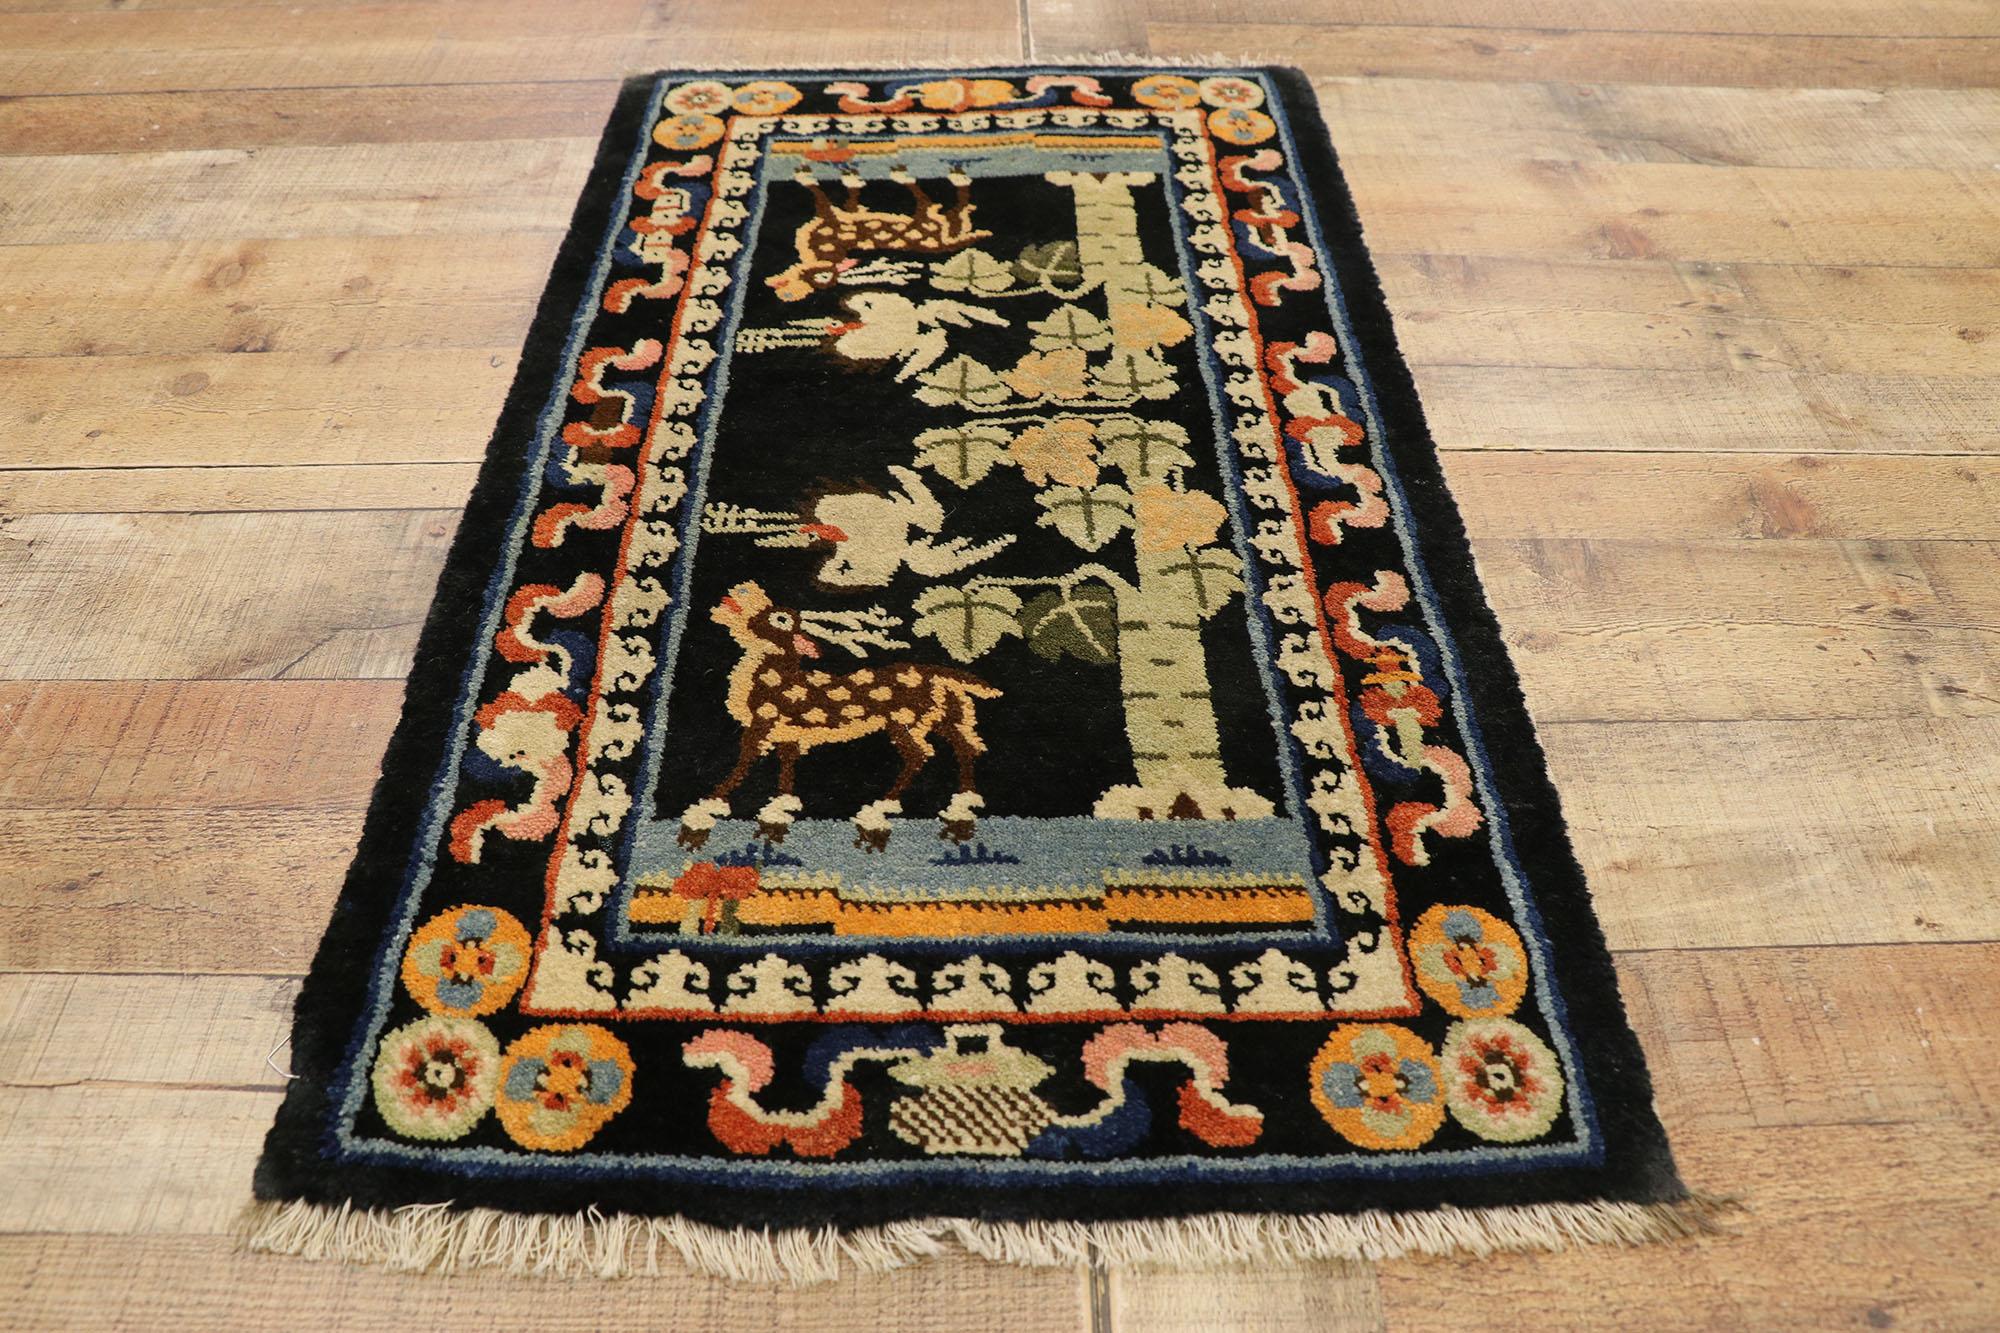 Hand-Knotted Antique Chinese Pictorial Rug with Deer and Crane, Small Accent Rug